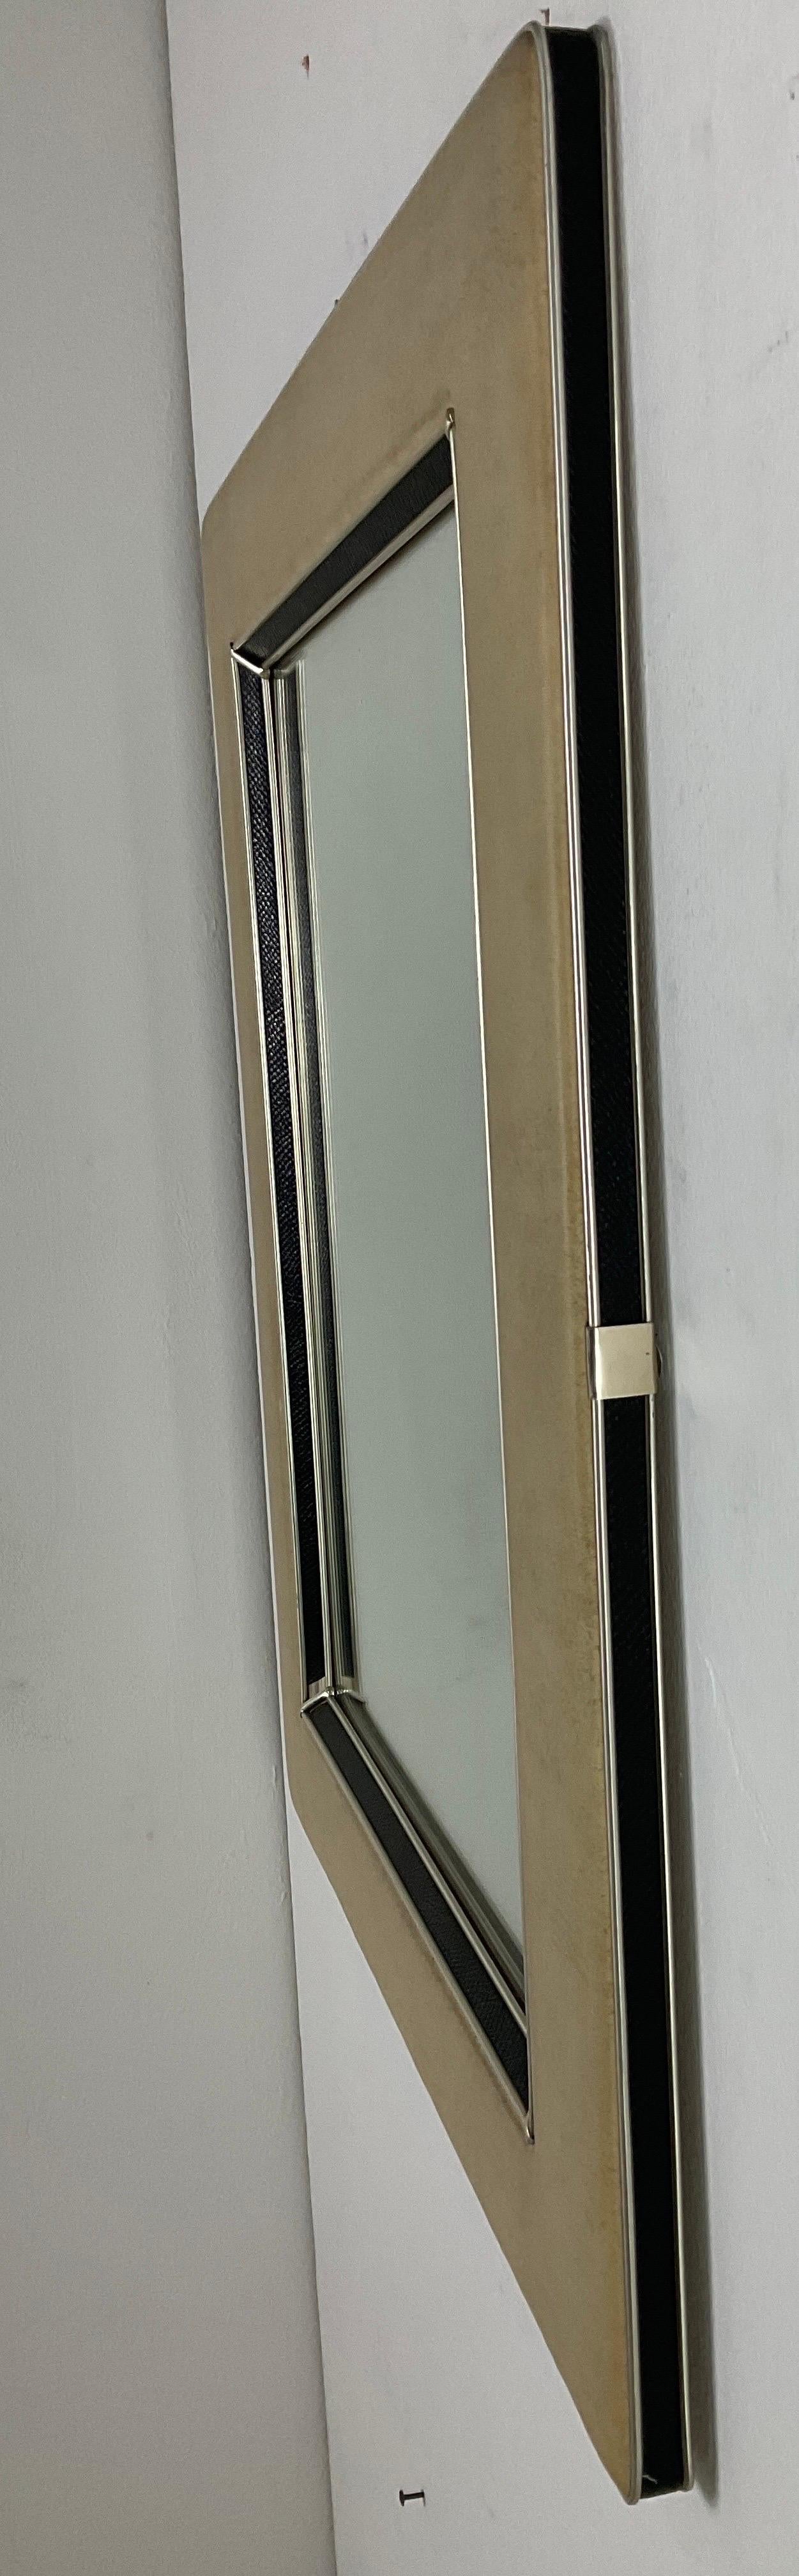 Rare mirror by Umberto Mascagni, 50s For Sale 3